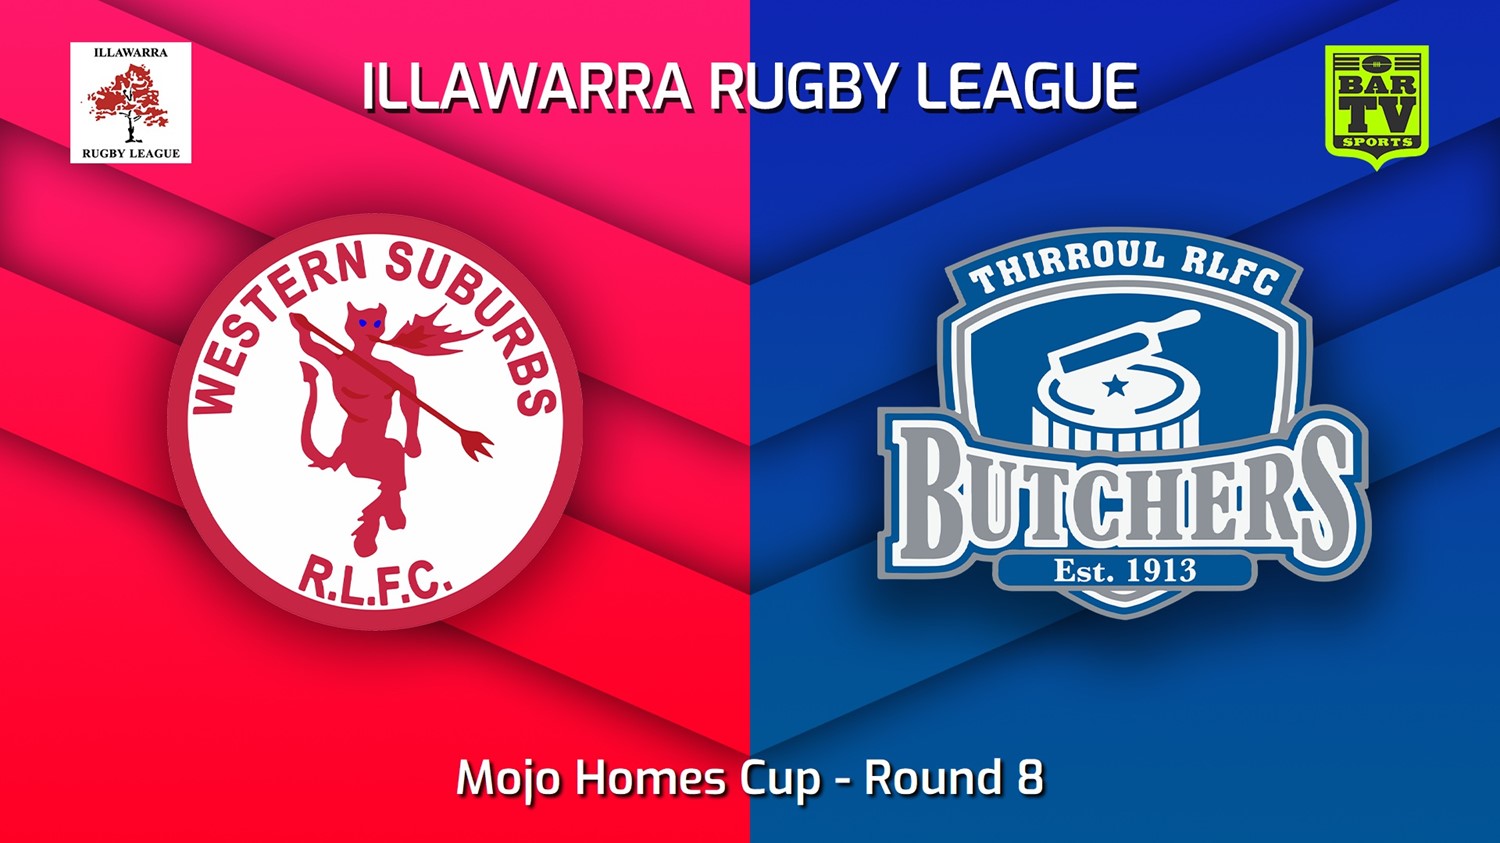 220625-Illawarra Round 8 - Mojo Homes Cup - Western Suburbs Devils v Thirroul Butchers Slate Image